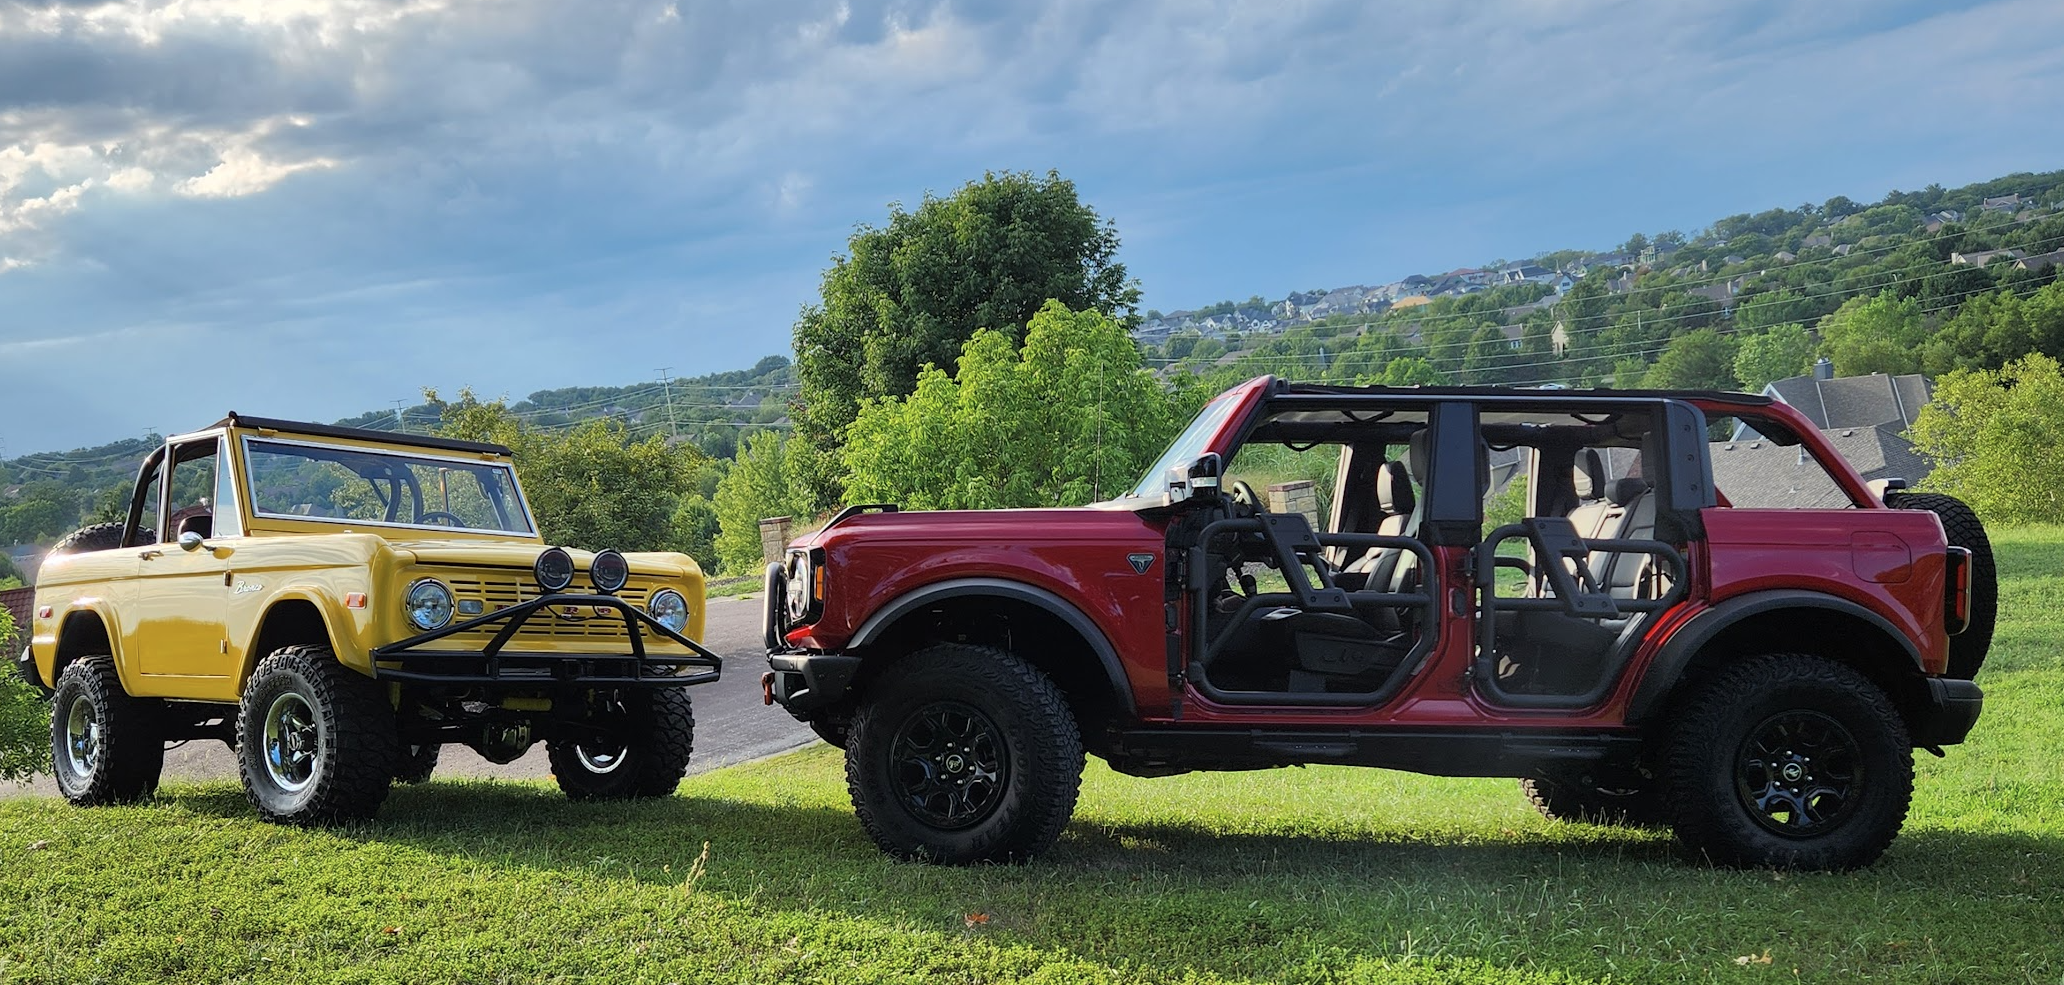 Ford Bronco TopLift Pros OCTOBER GIVEAWAY - WIN A $1,000 TOPLIFT PROS GIFT CARD 1696520758530